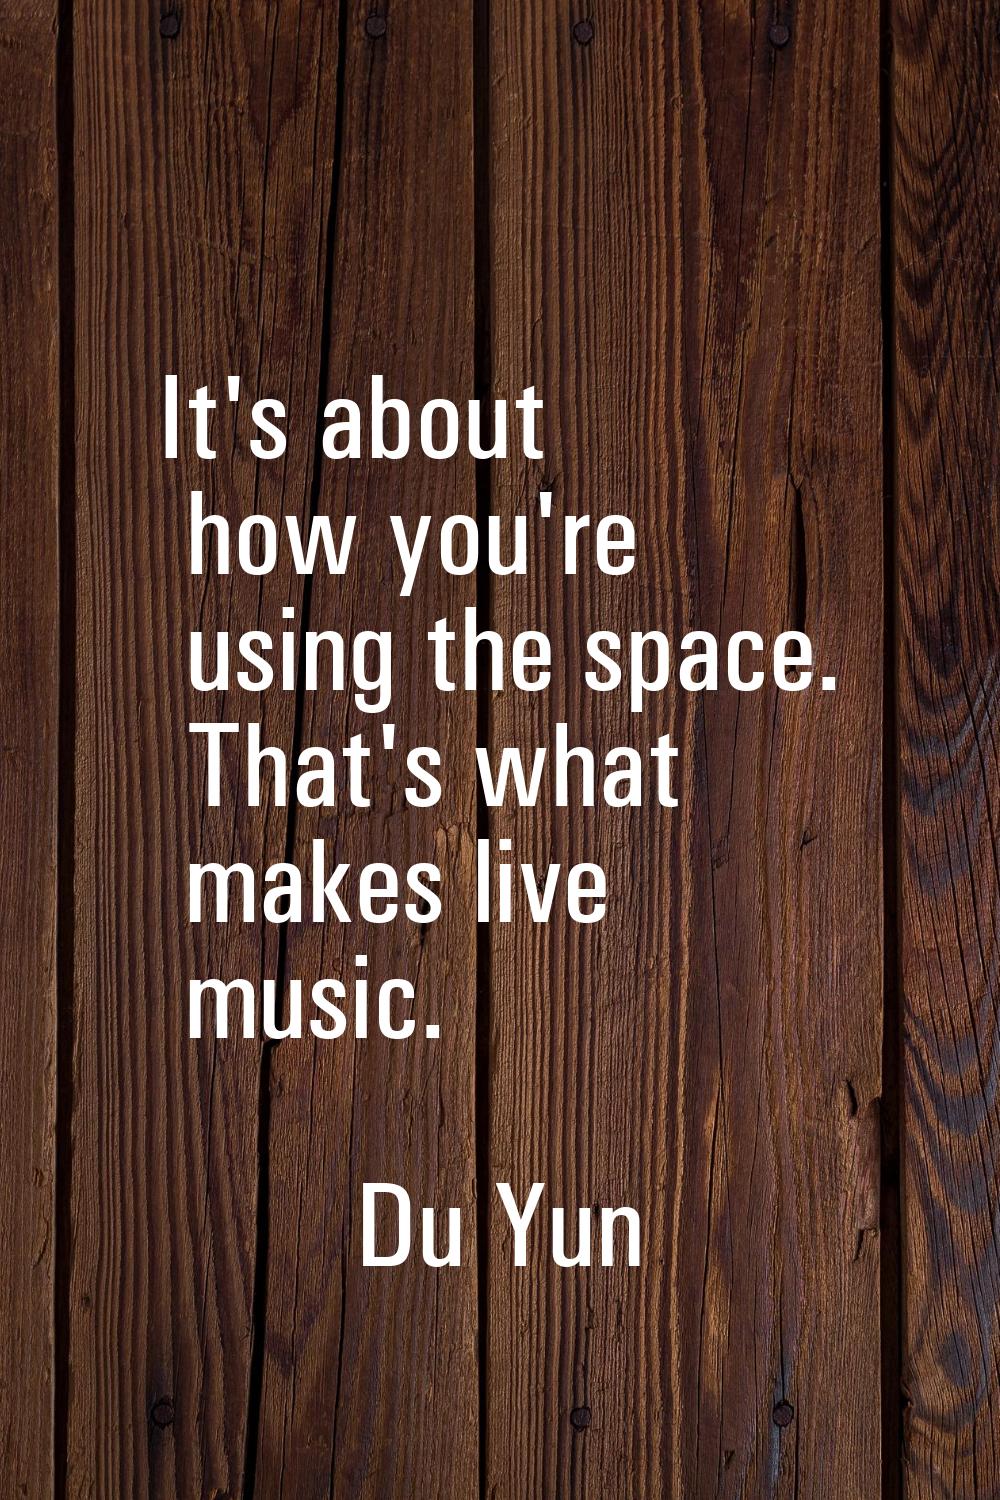 It's about how you're using the space. That's what makes live music.